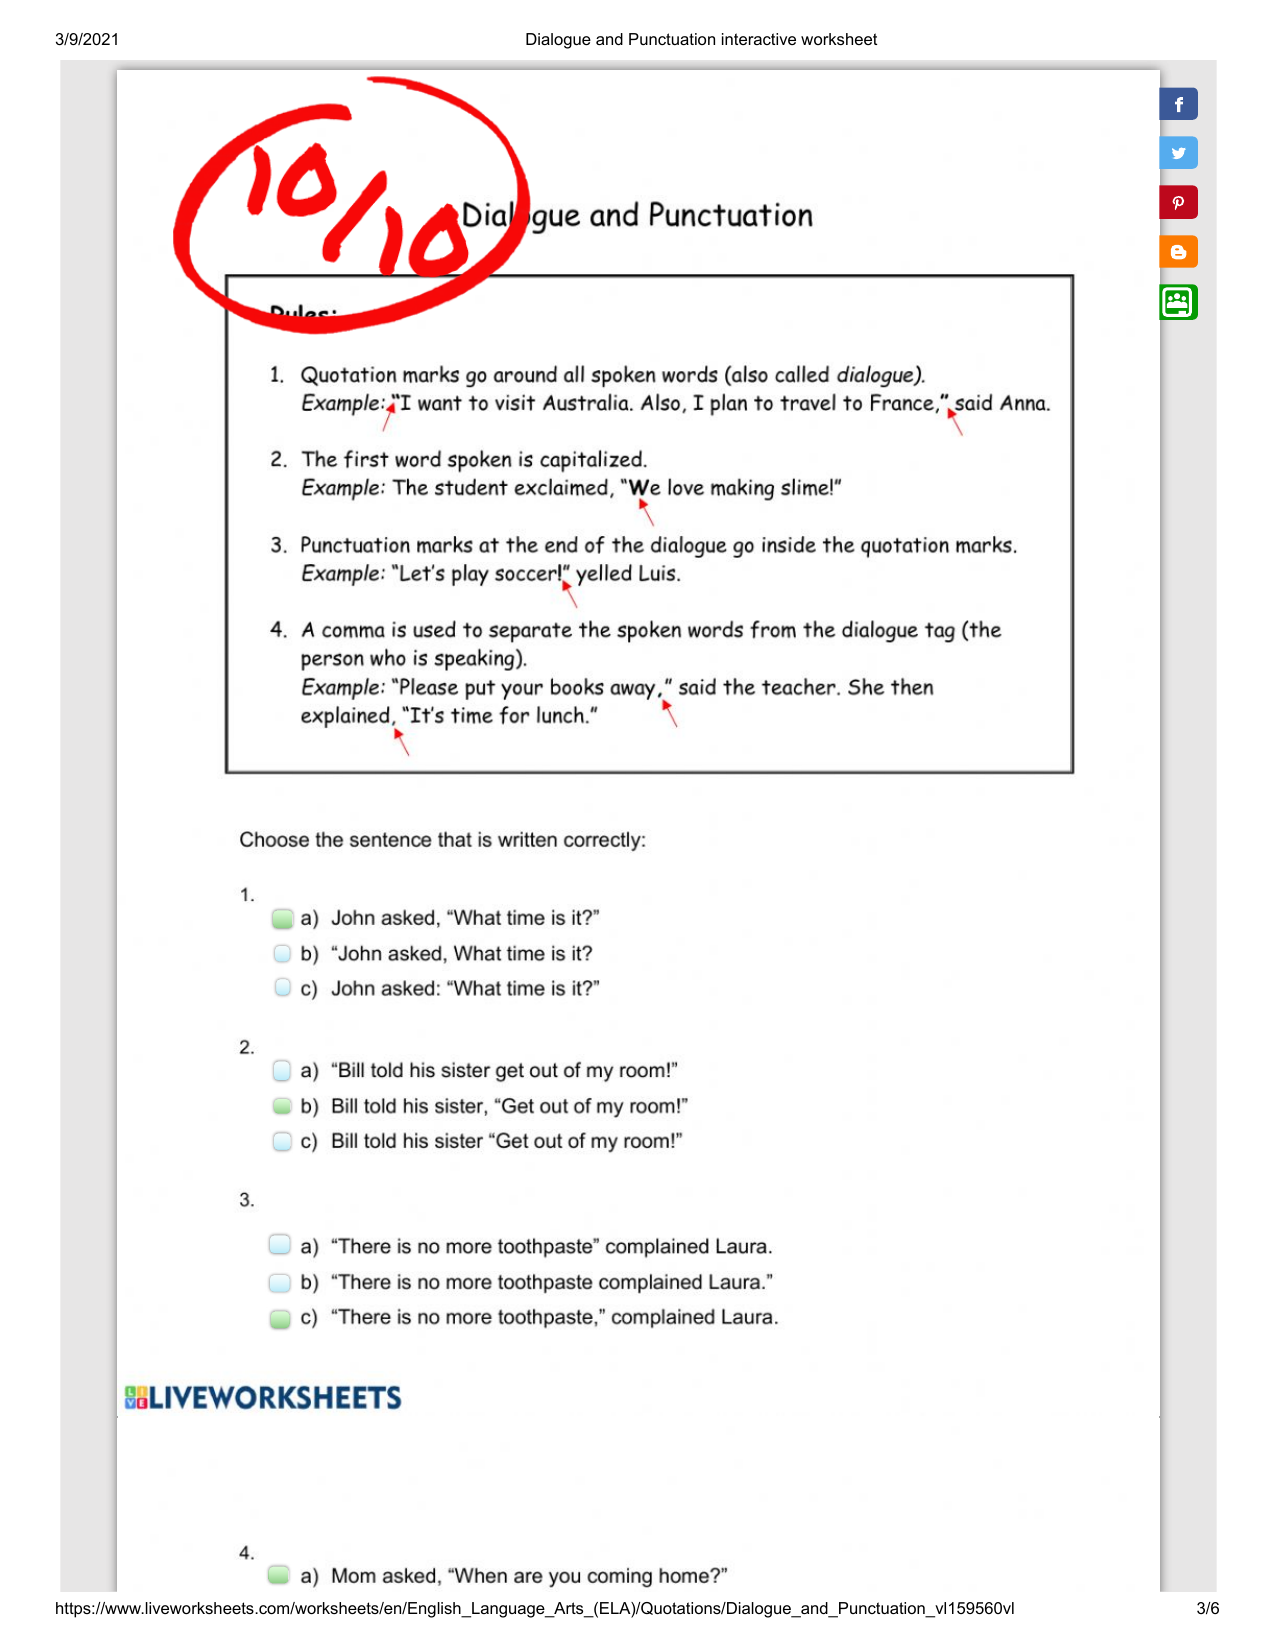 dialogue and punctuation interactive worksheet